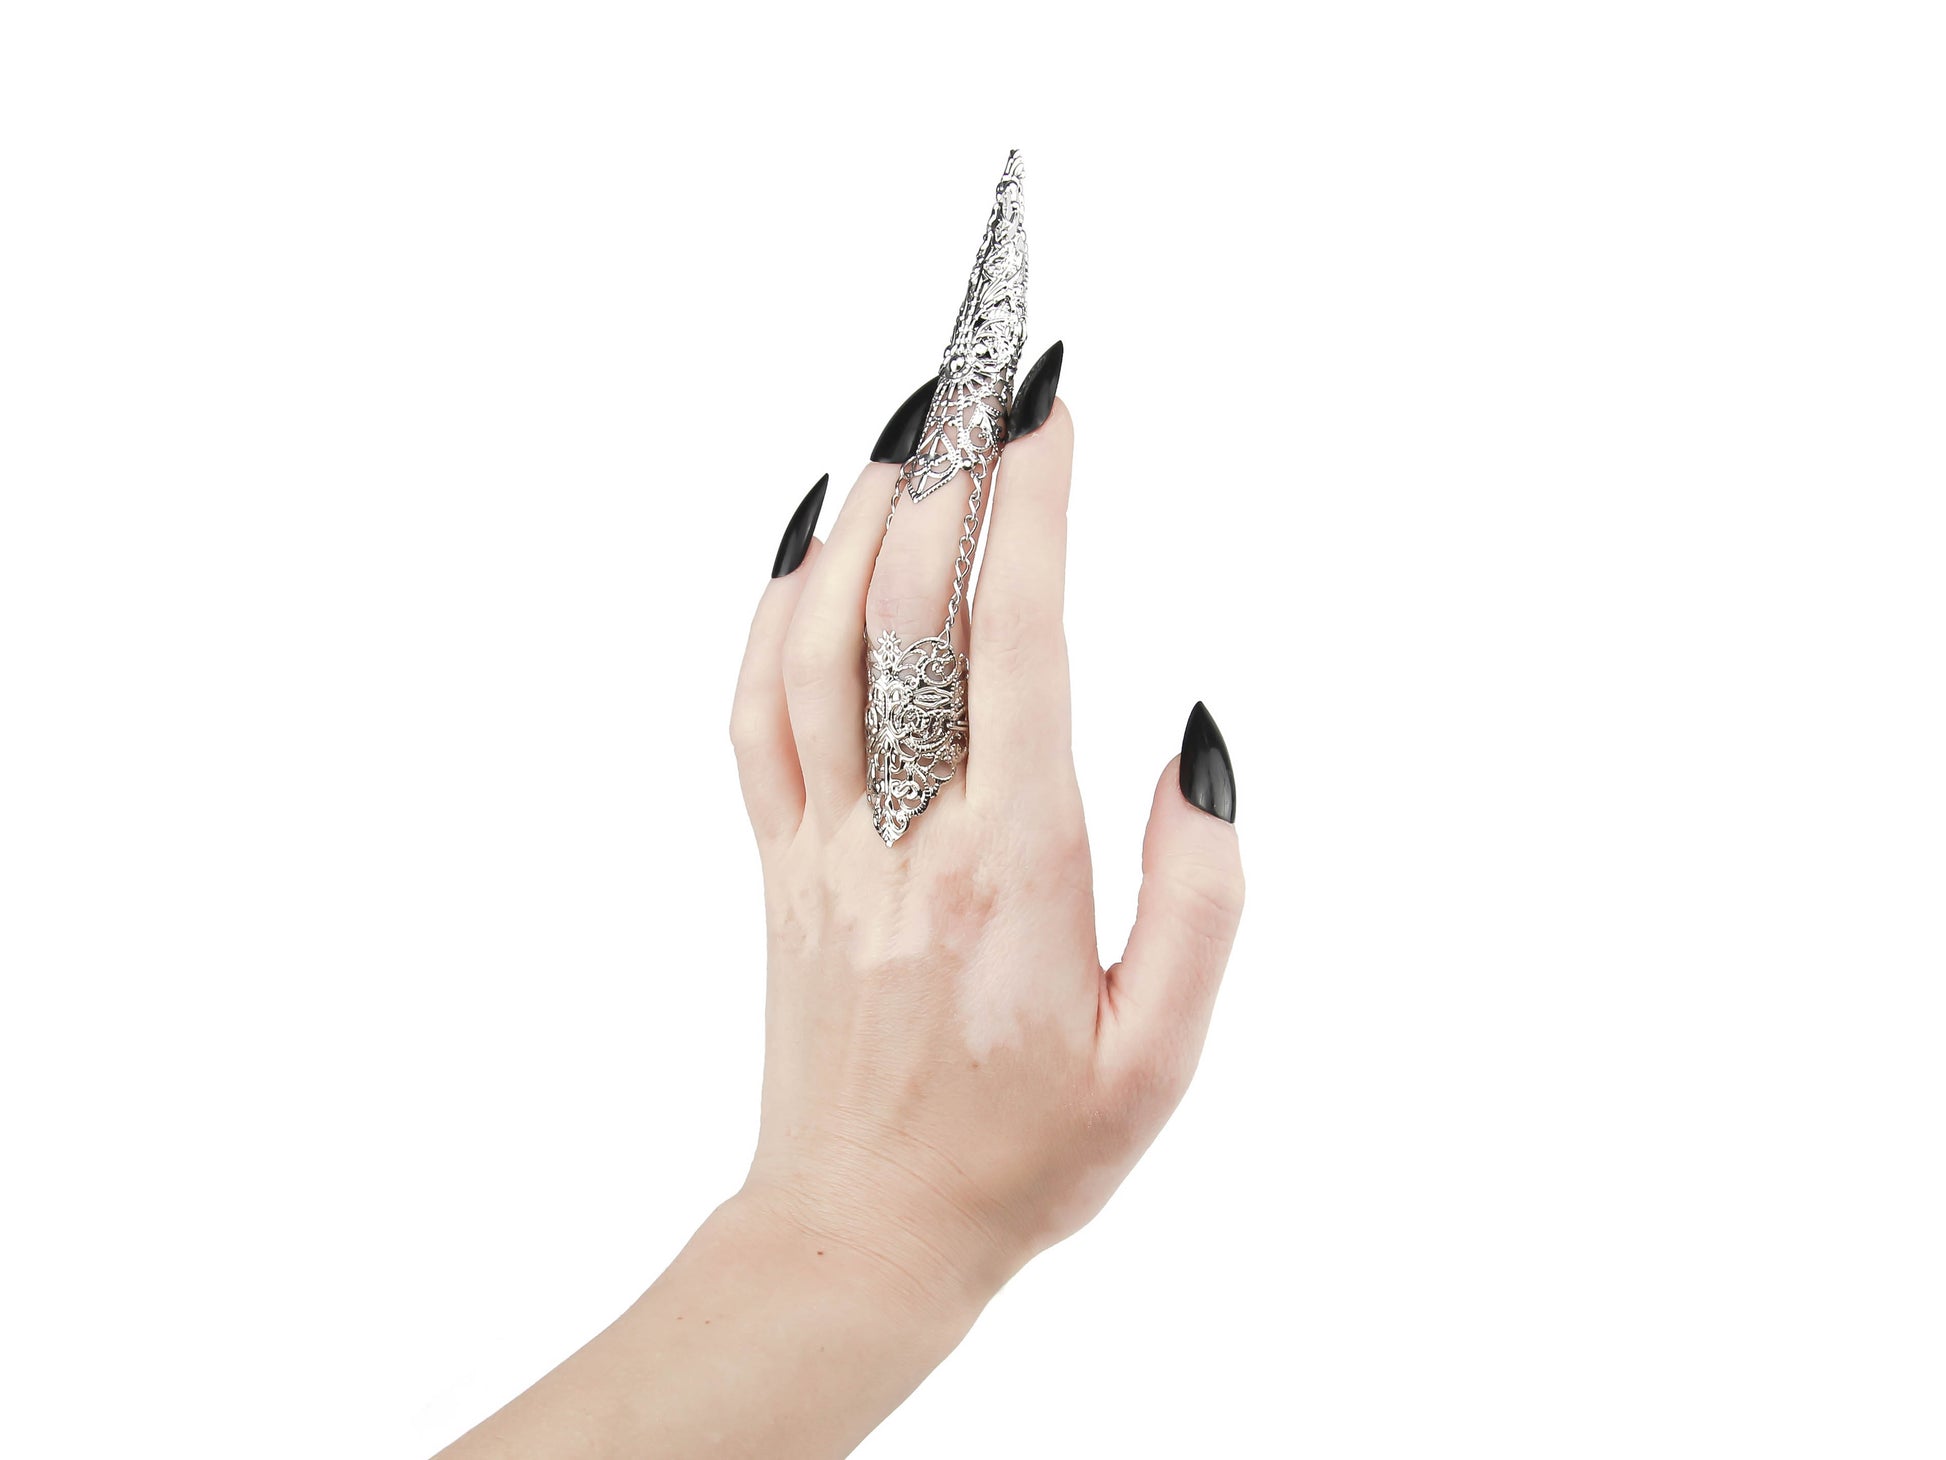 A hand models a Myril Jewels full finger claw ring, featuring elaborate silver filigree work that defines neo-goth jewelry. The ring extends over the finger with a tapered, ornate design, ideal for a dramatic gothic-chic statement. It's a striking piece for Halloween, an edgy accessory for everyday wear, and perfect for witchcore, whimsigoth, or minimal goth fashion. This claw ring is also a dazzling choice for rave party jewelry, festival adornments, or drag queen jewels.